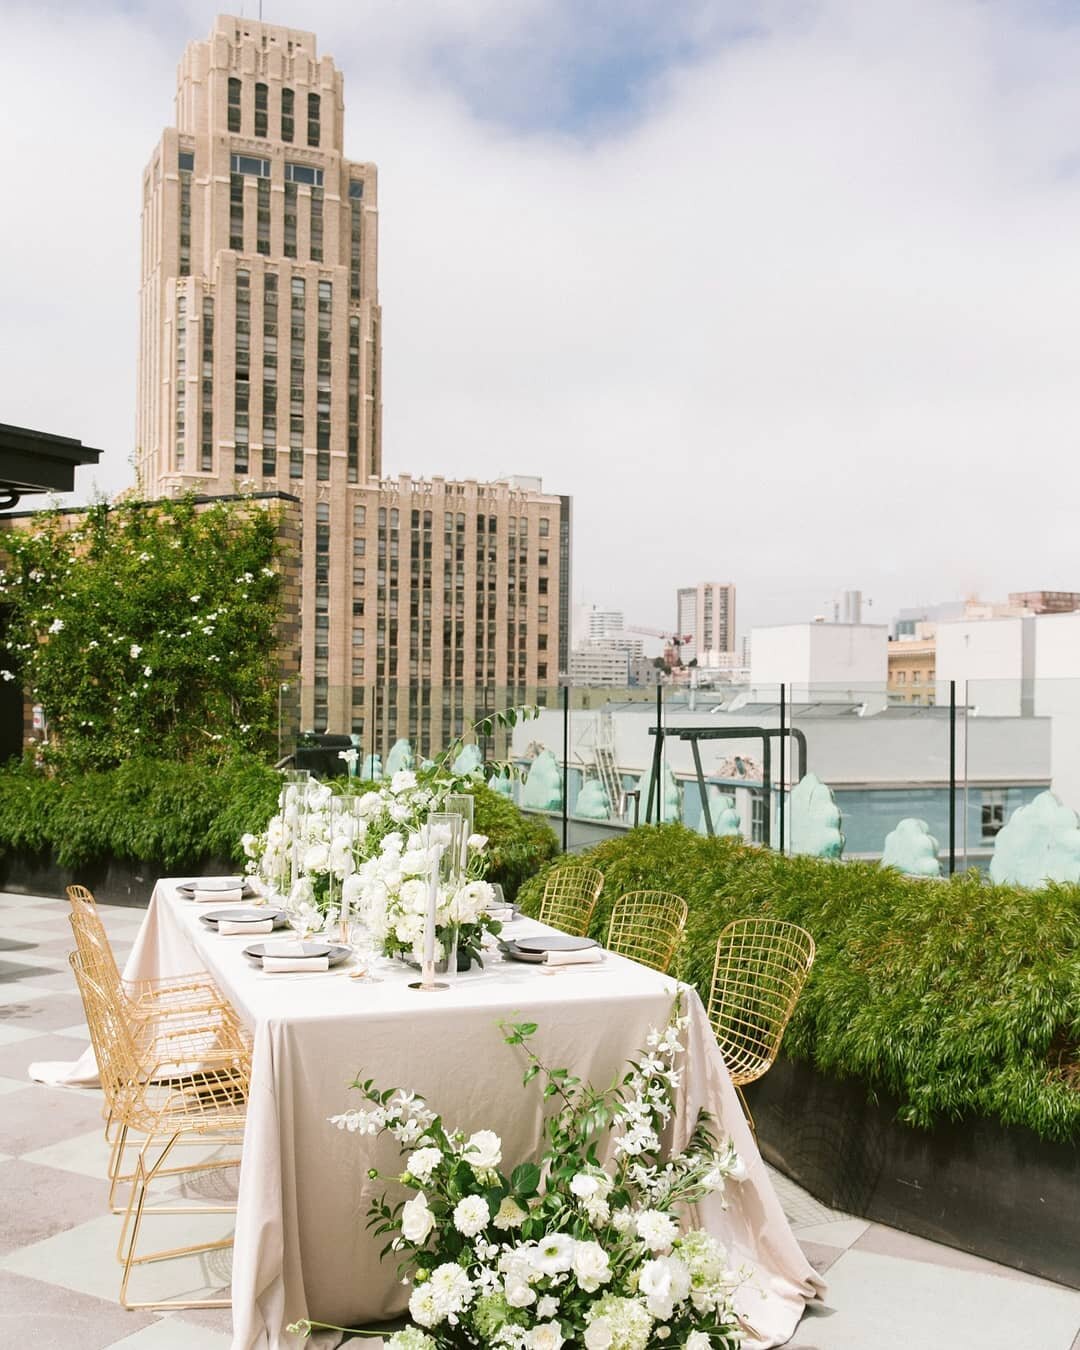 ROOFTOP WEDDING ✨ How amazing is this view from the @sanfranciscoproper hotel!!?!! With a gorgeous tablescape to complete the dreaminess of this wedding shoot 🖤

.
.
.

Photography: @jasmineleephoto 
Planning &amp; Design: @ksawweddings 
Florals: